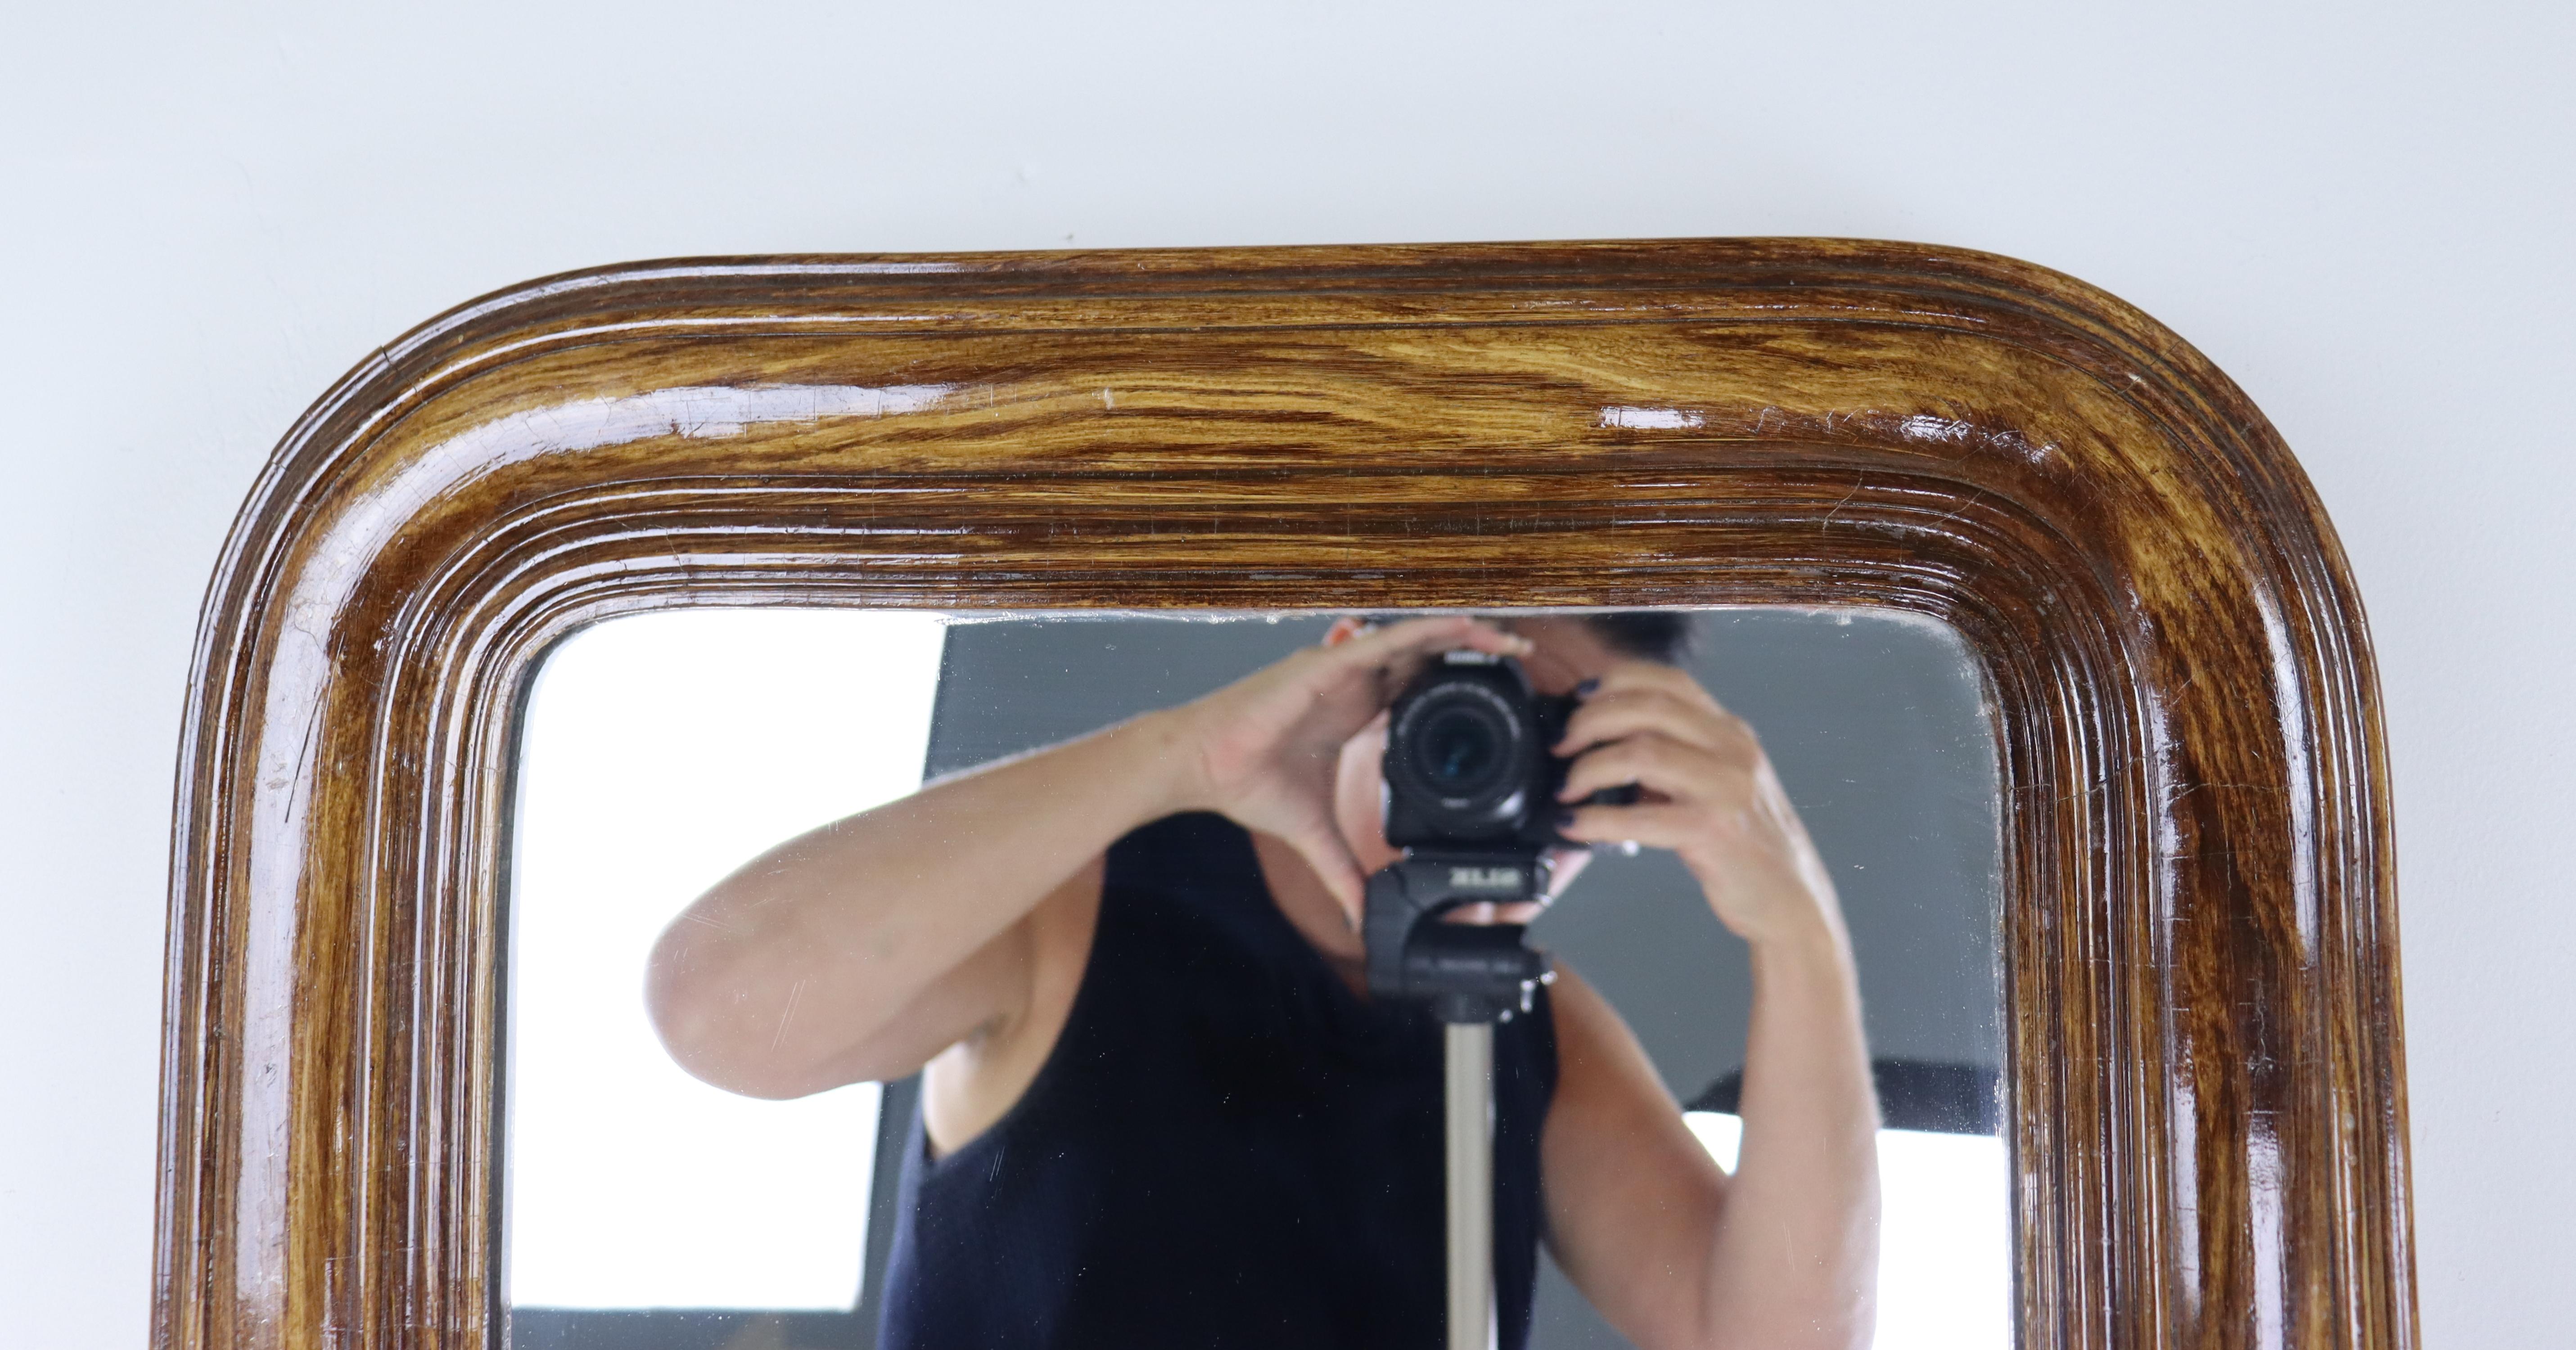 A medium sized Louis Phillip mirror, made traditionally of wood covered with gesso, and in this case, faux bois painted to resemble wood.  Very eye catching, though there are some minor chips and scrathes, shown in thumbnails.  Glass is in good